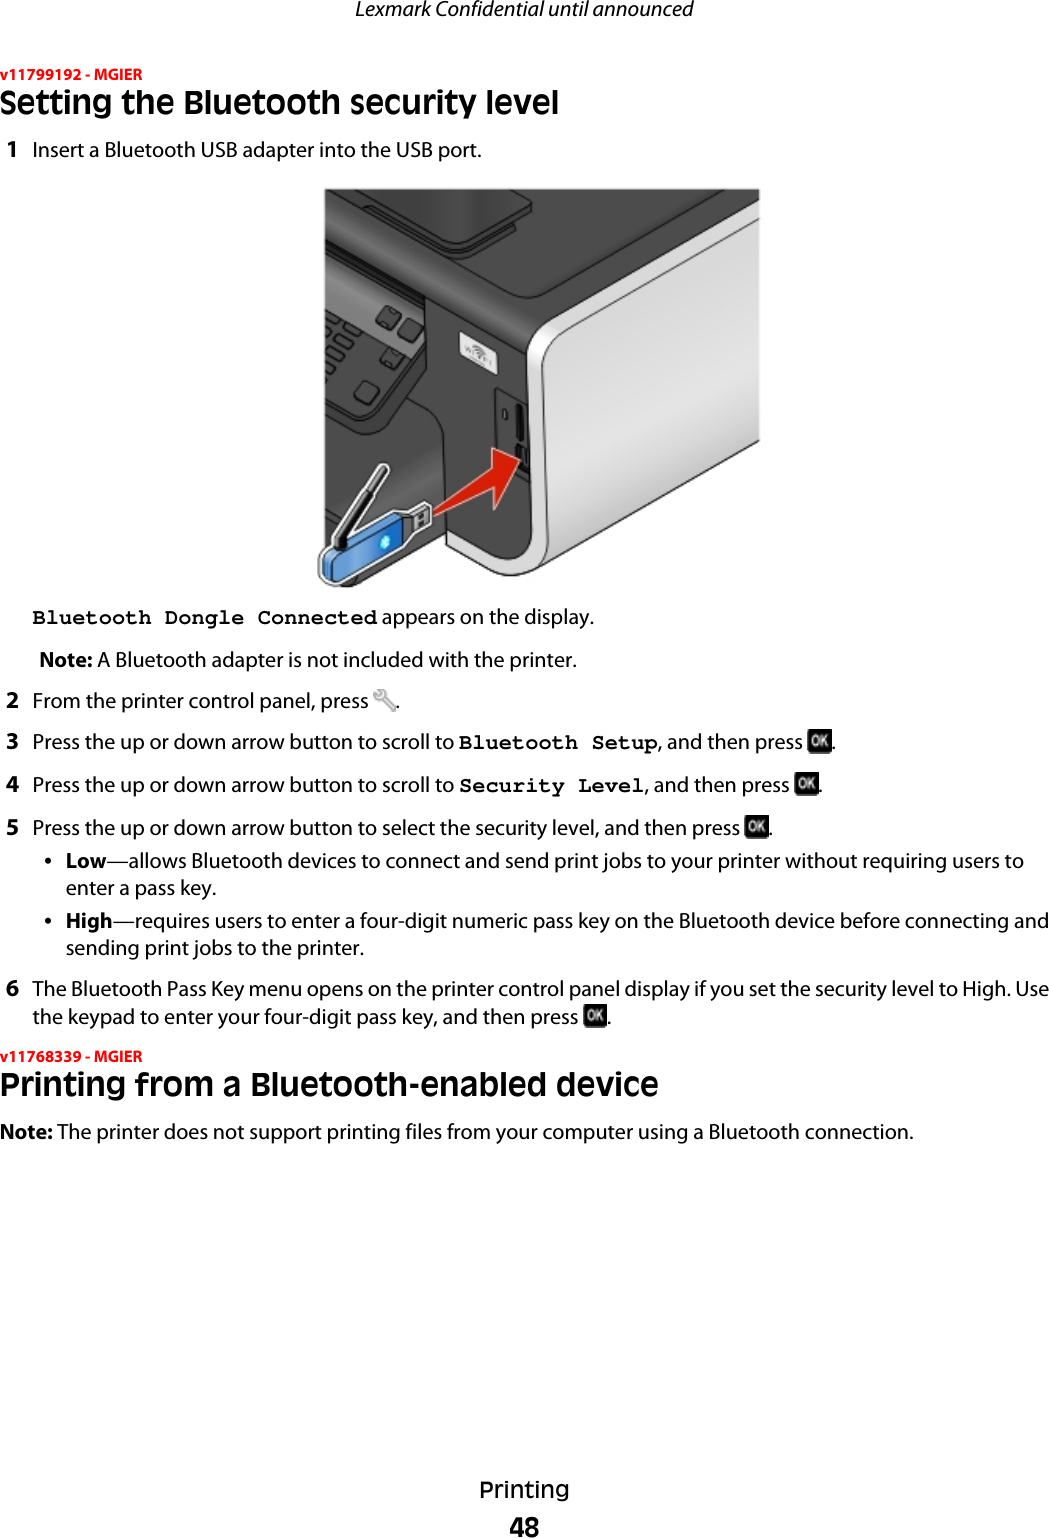 v11799192 - MGIERSetting the Bluetooth security level1Insert a Bluetooth USB adapter into the USB port.Bluetooth Dongle Connected appears on the display.Note: A Bluetooth adapter is not included with the printer.2From the printer control panel, press  .3Press the up or down arrow button to scroll to Bluetooth Setup, and then press  .4Press the up or down arrow button to scroll to Security Level, and then press  .5Press the up or down arrow button to select the security level, and then press  .•Low—allows Bluetooth devices to connect and send print jobs to your printer without requiring users toenter a pass key.•High—requires users to enter a four-digit numeric pass key on the Bluetooth device before connecting andsending print jobs to the printer.6The Bluetooth Pass Key menu opens on the printer control panel display if you set the security level to High. Usethe keypad to enter your four-digit pass key, and then press  .v11768339 - MGIERPrinting from a Bluetooth-enabled deviceNote: The printer does not support printing files from your computer using a Bluetooth connection.Lexmark Confidential until announcedPrinting48